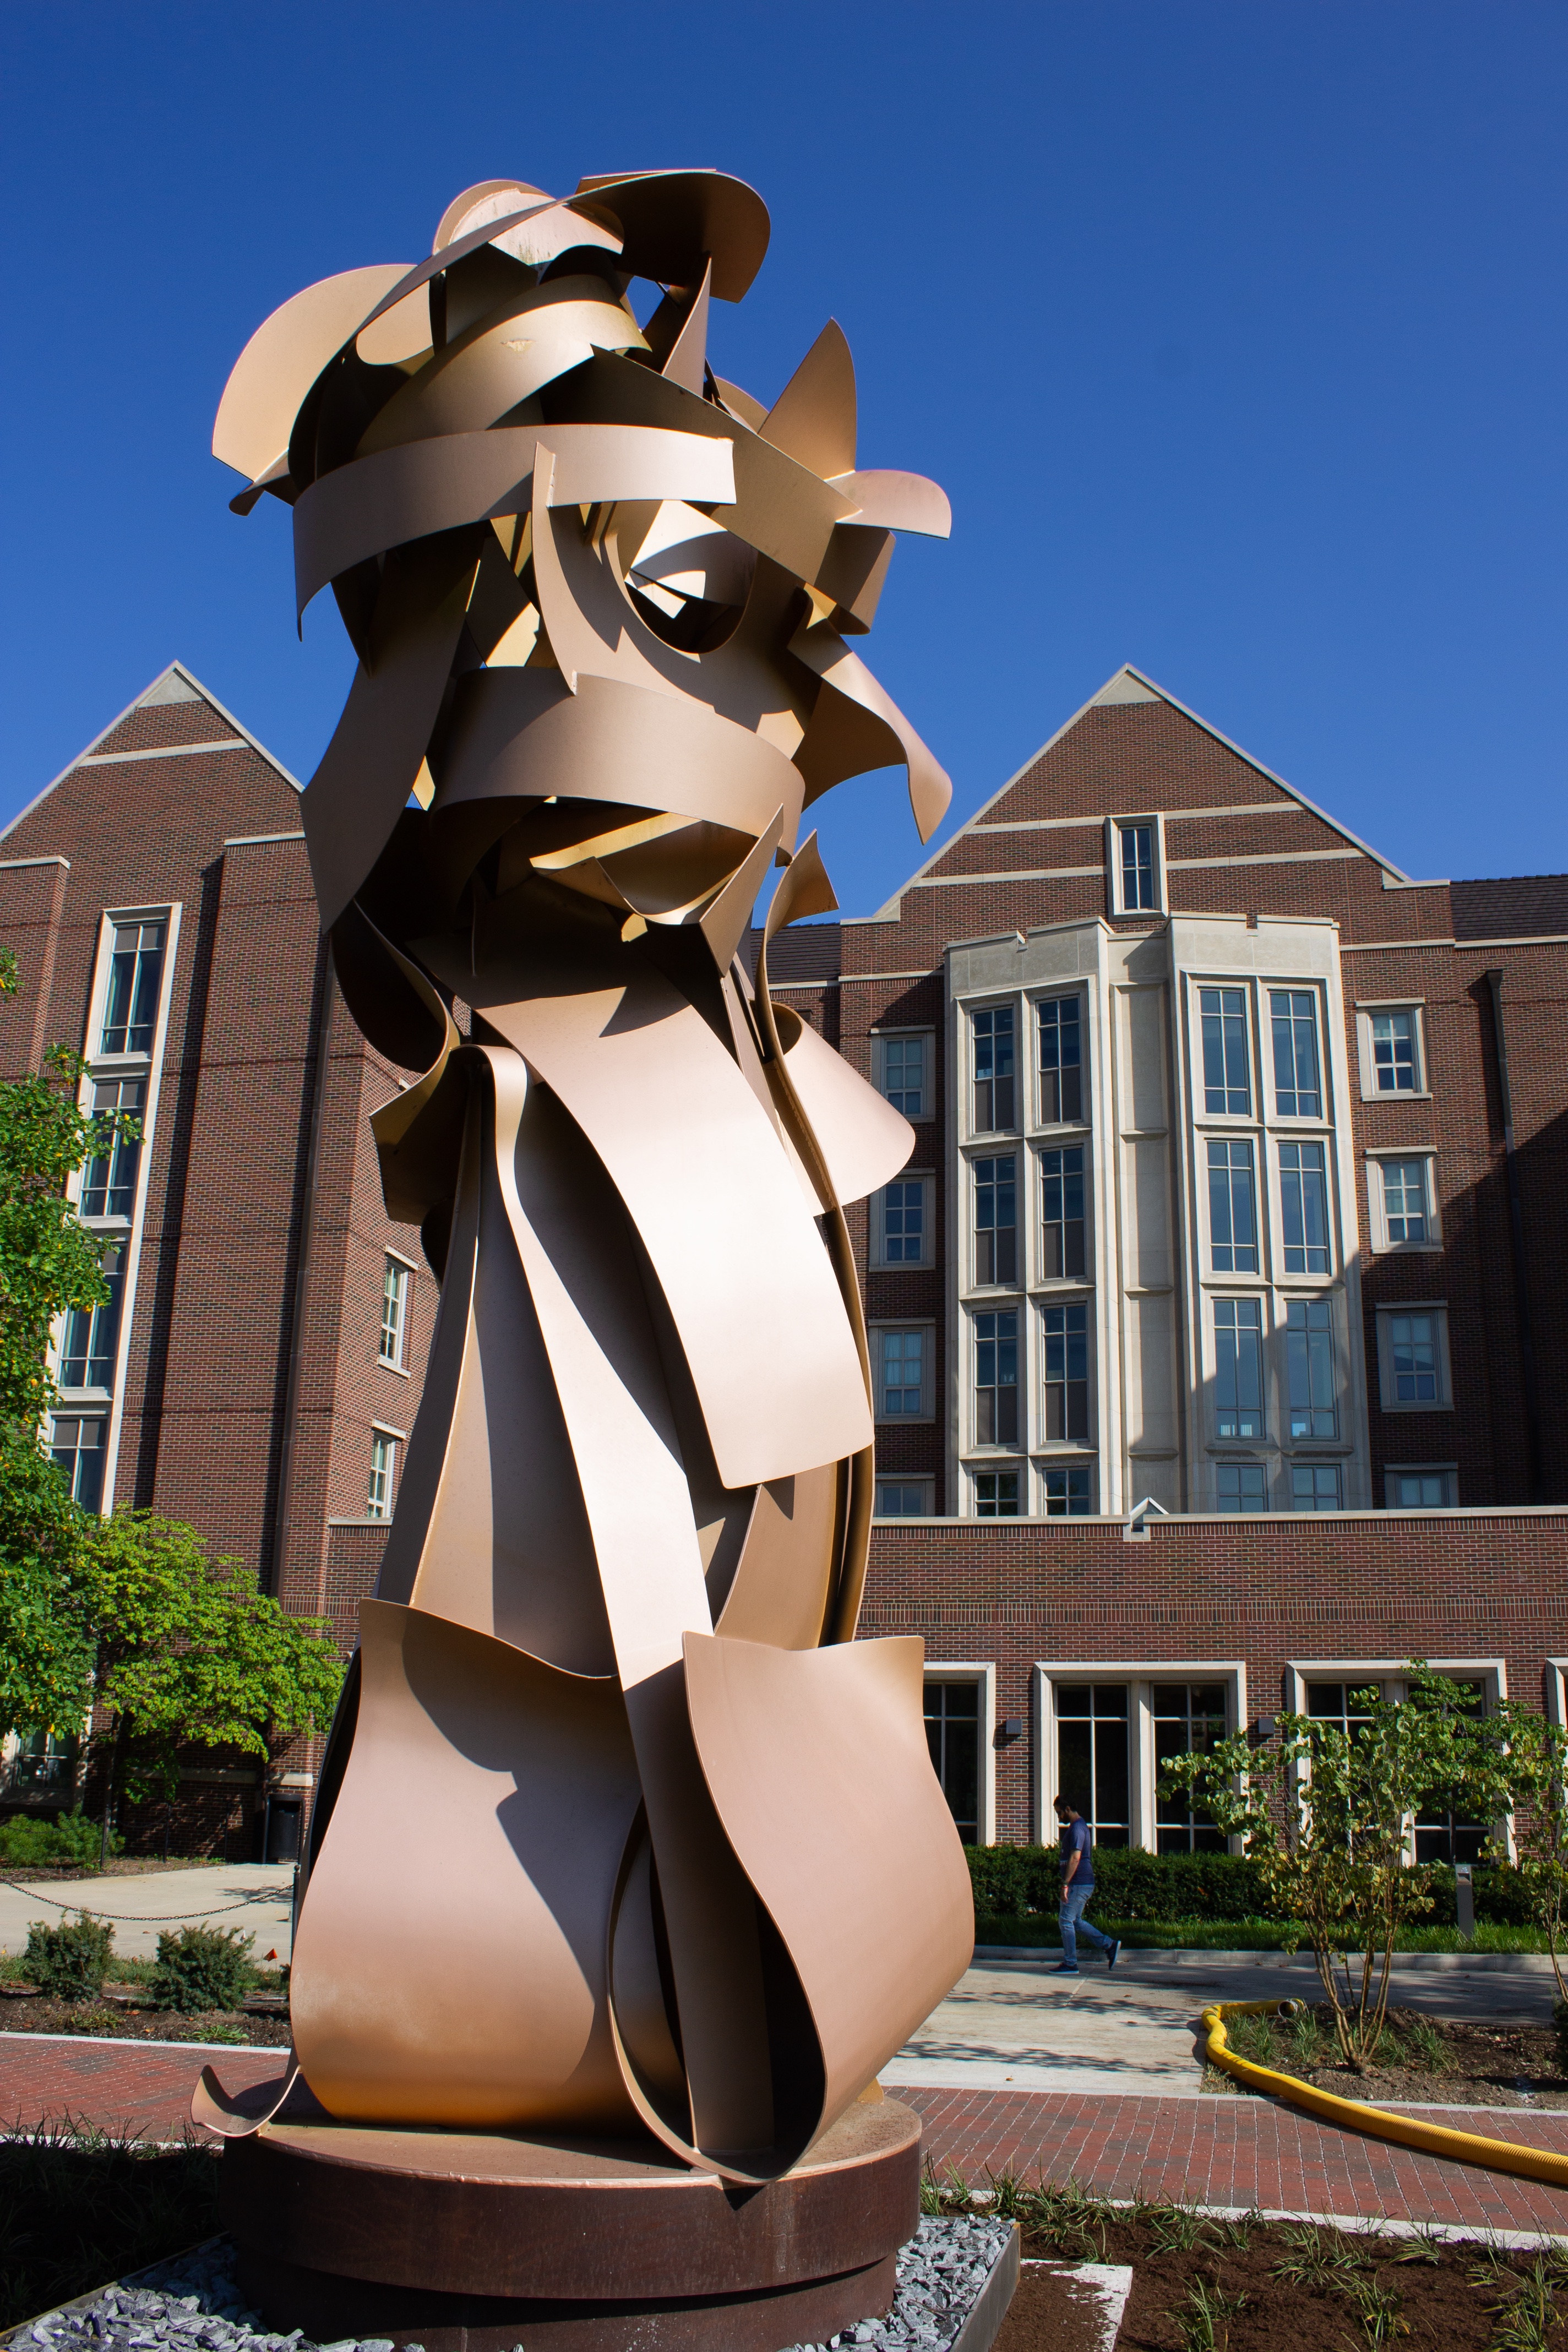 Albert Paley's 2013 Envious Composure metal sculpture on display in front of the First Street Towers on Mitch Daniels Boulevard. College of Liberal Arts, 2023.